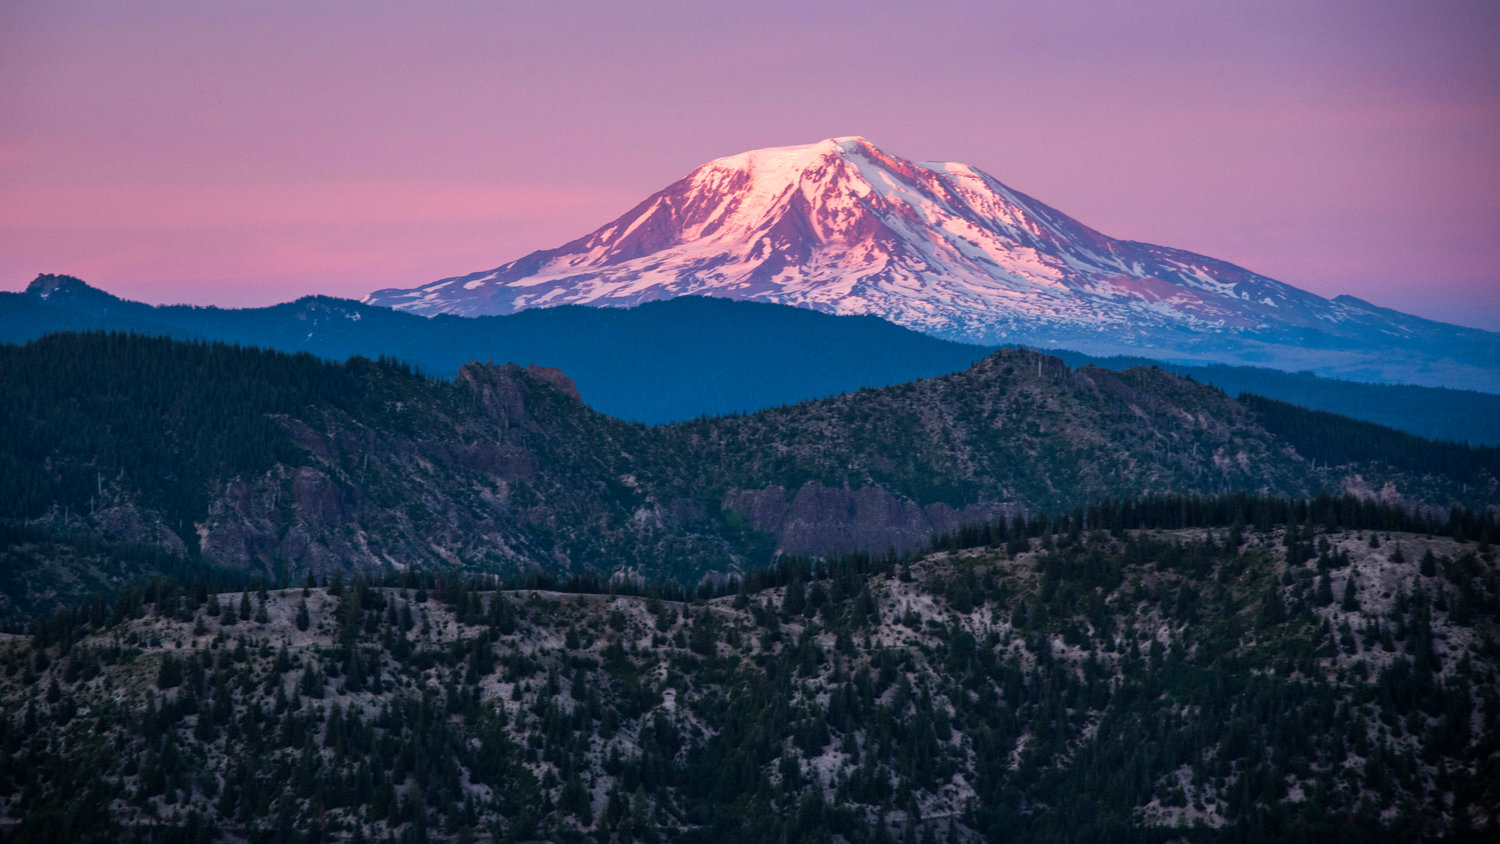 Mount Adams is pictured at sunset seen from the Gifford Pinchot National Forest in this Chronicle file photo.